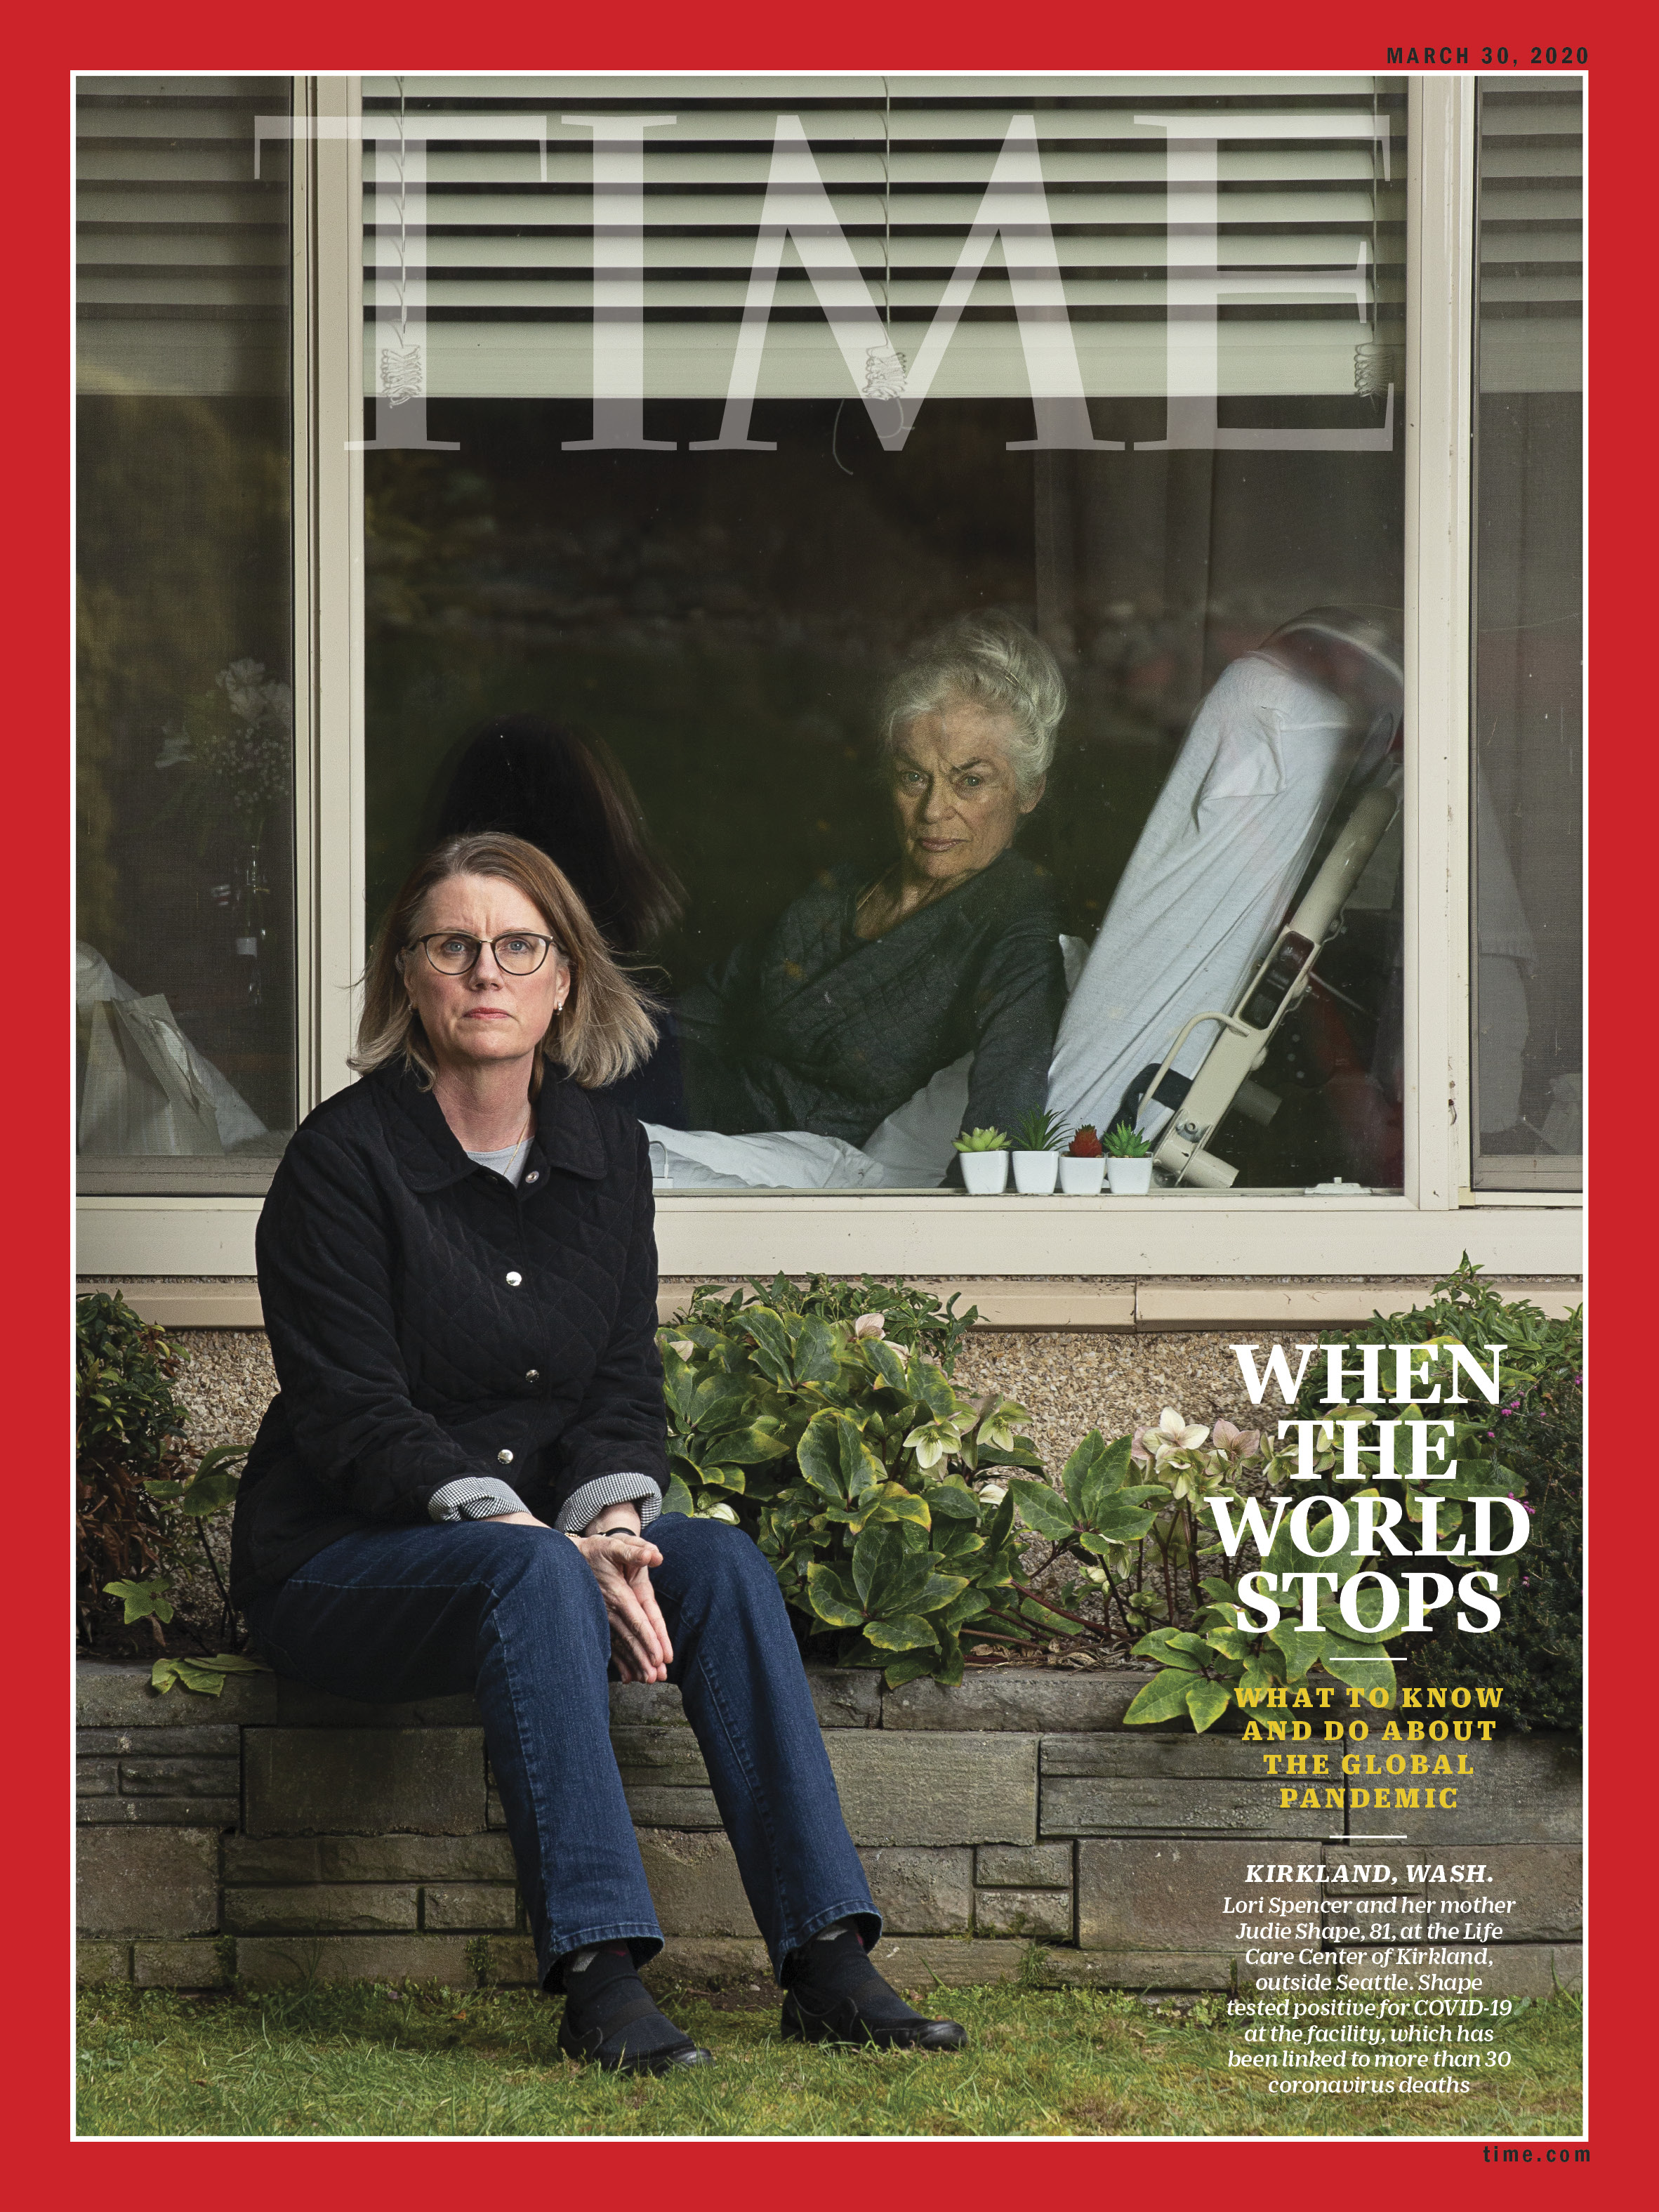 When the World Stops Time Magazine cover